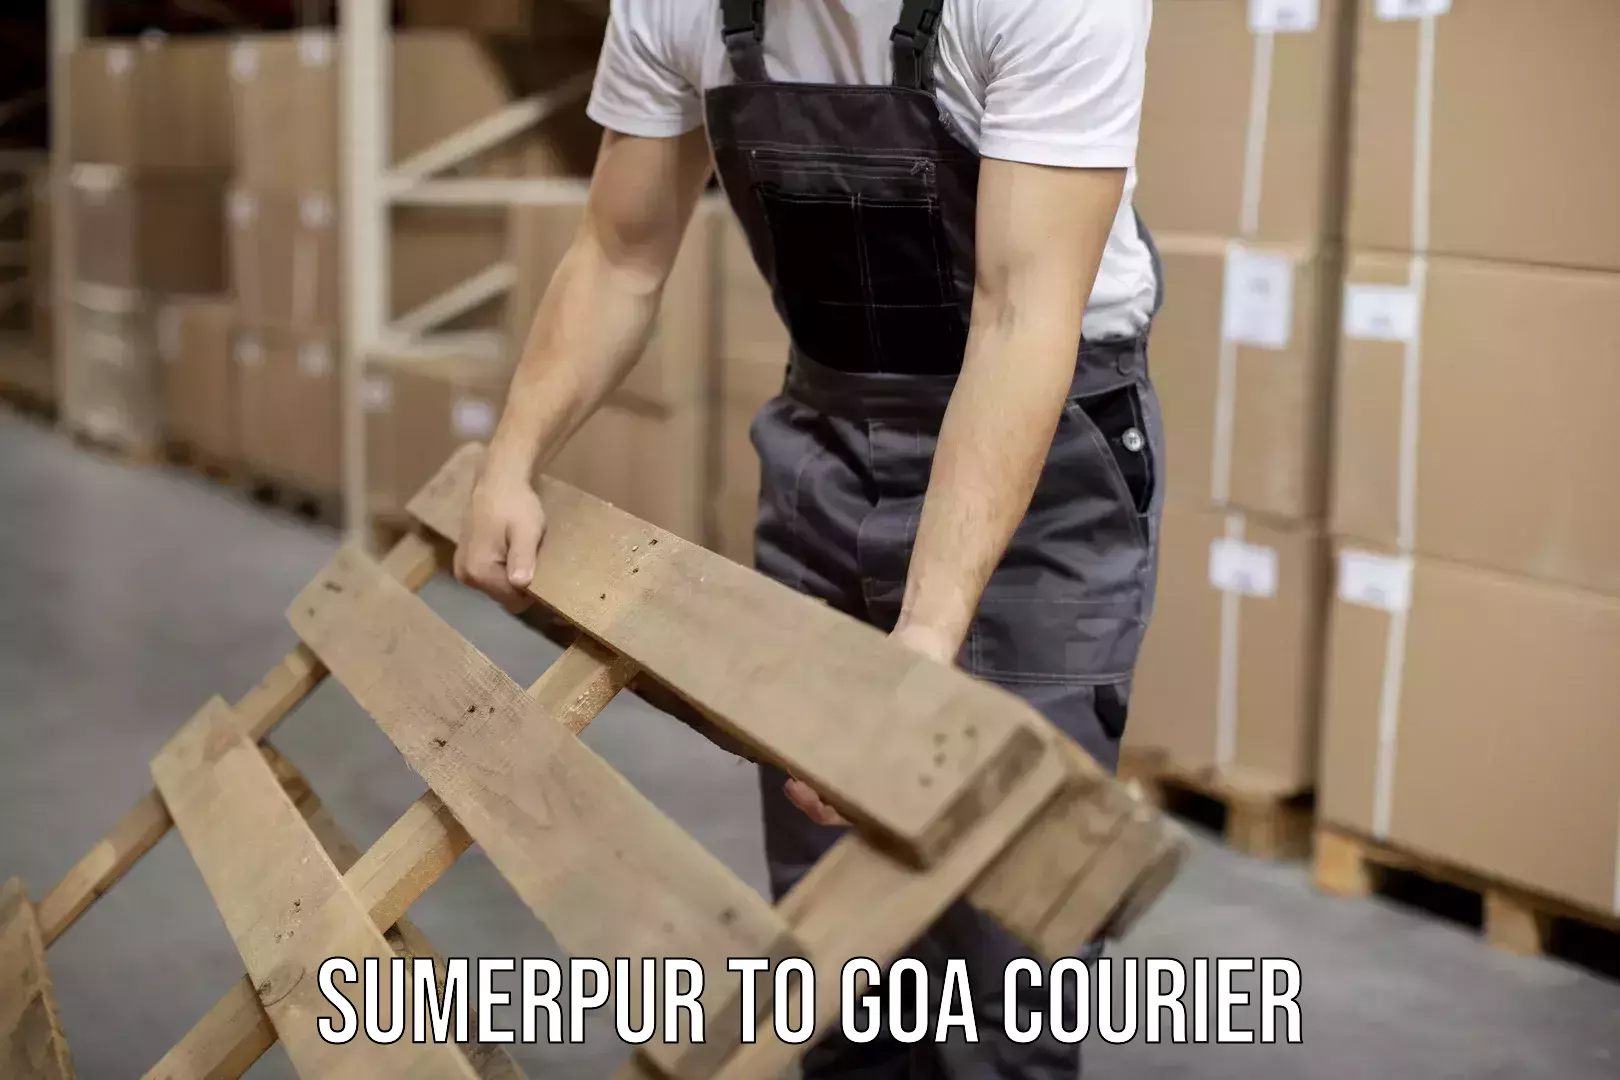 State-of-the-art courier technology Sumerpur to Goa